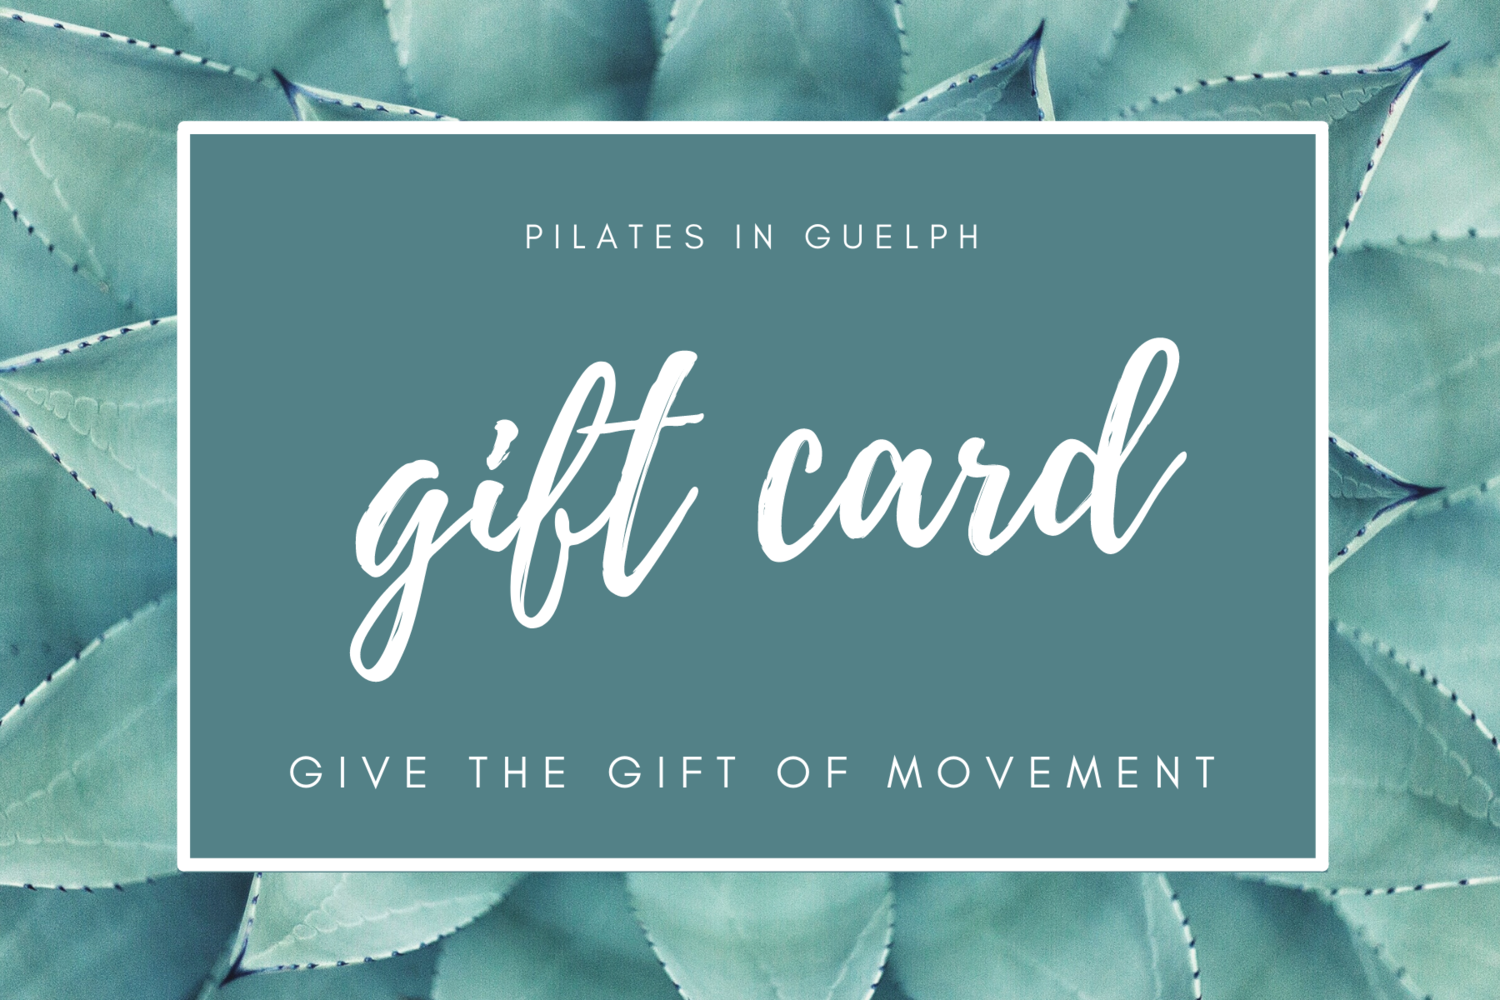 Pilates in Guelph Gift Card — Pilates in Guelph